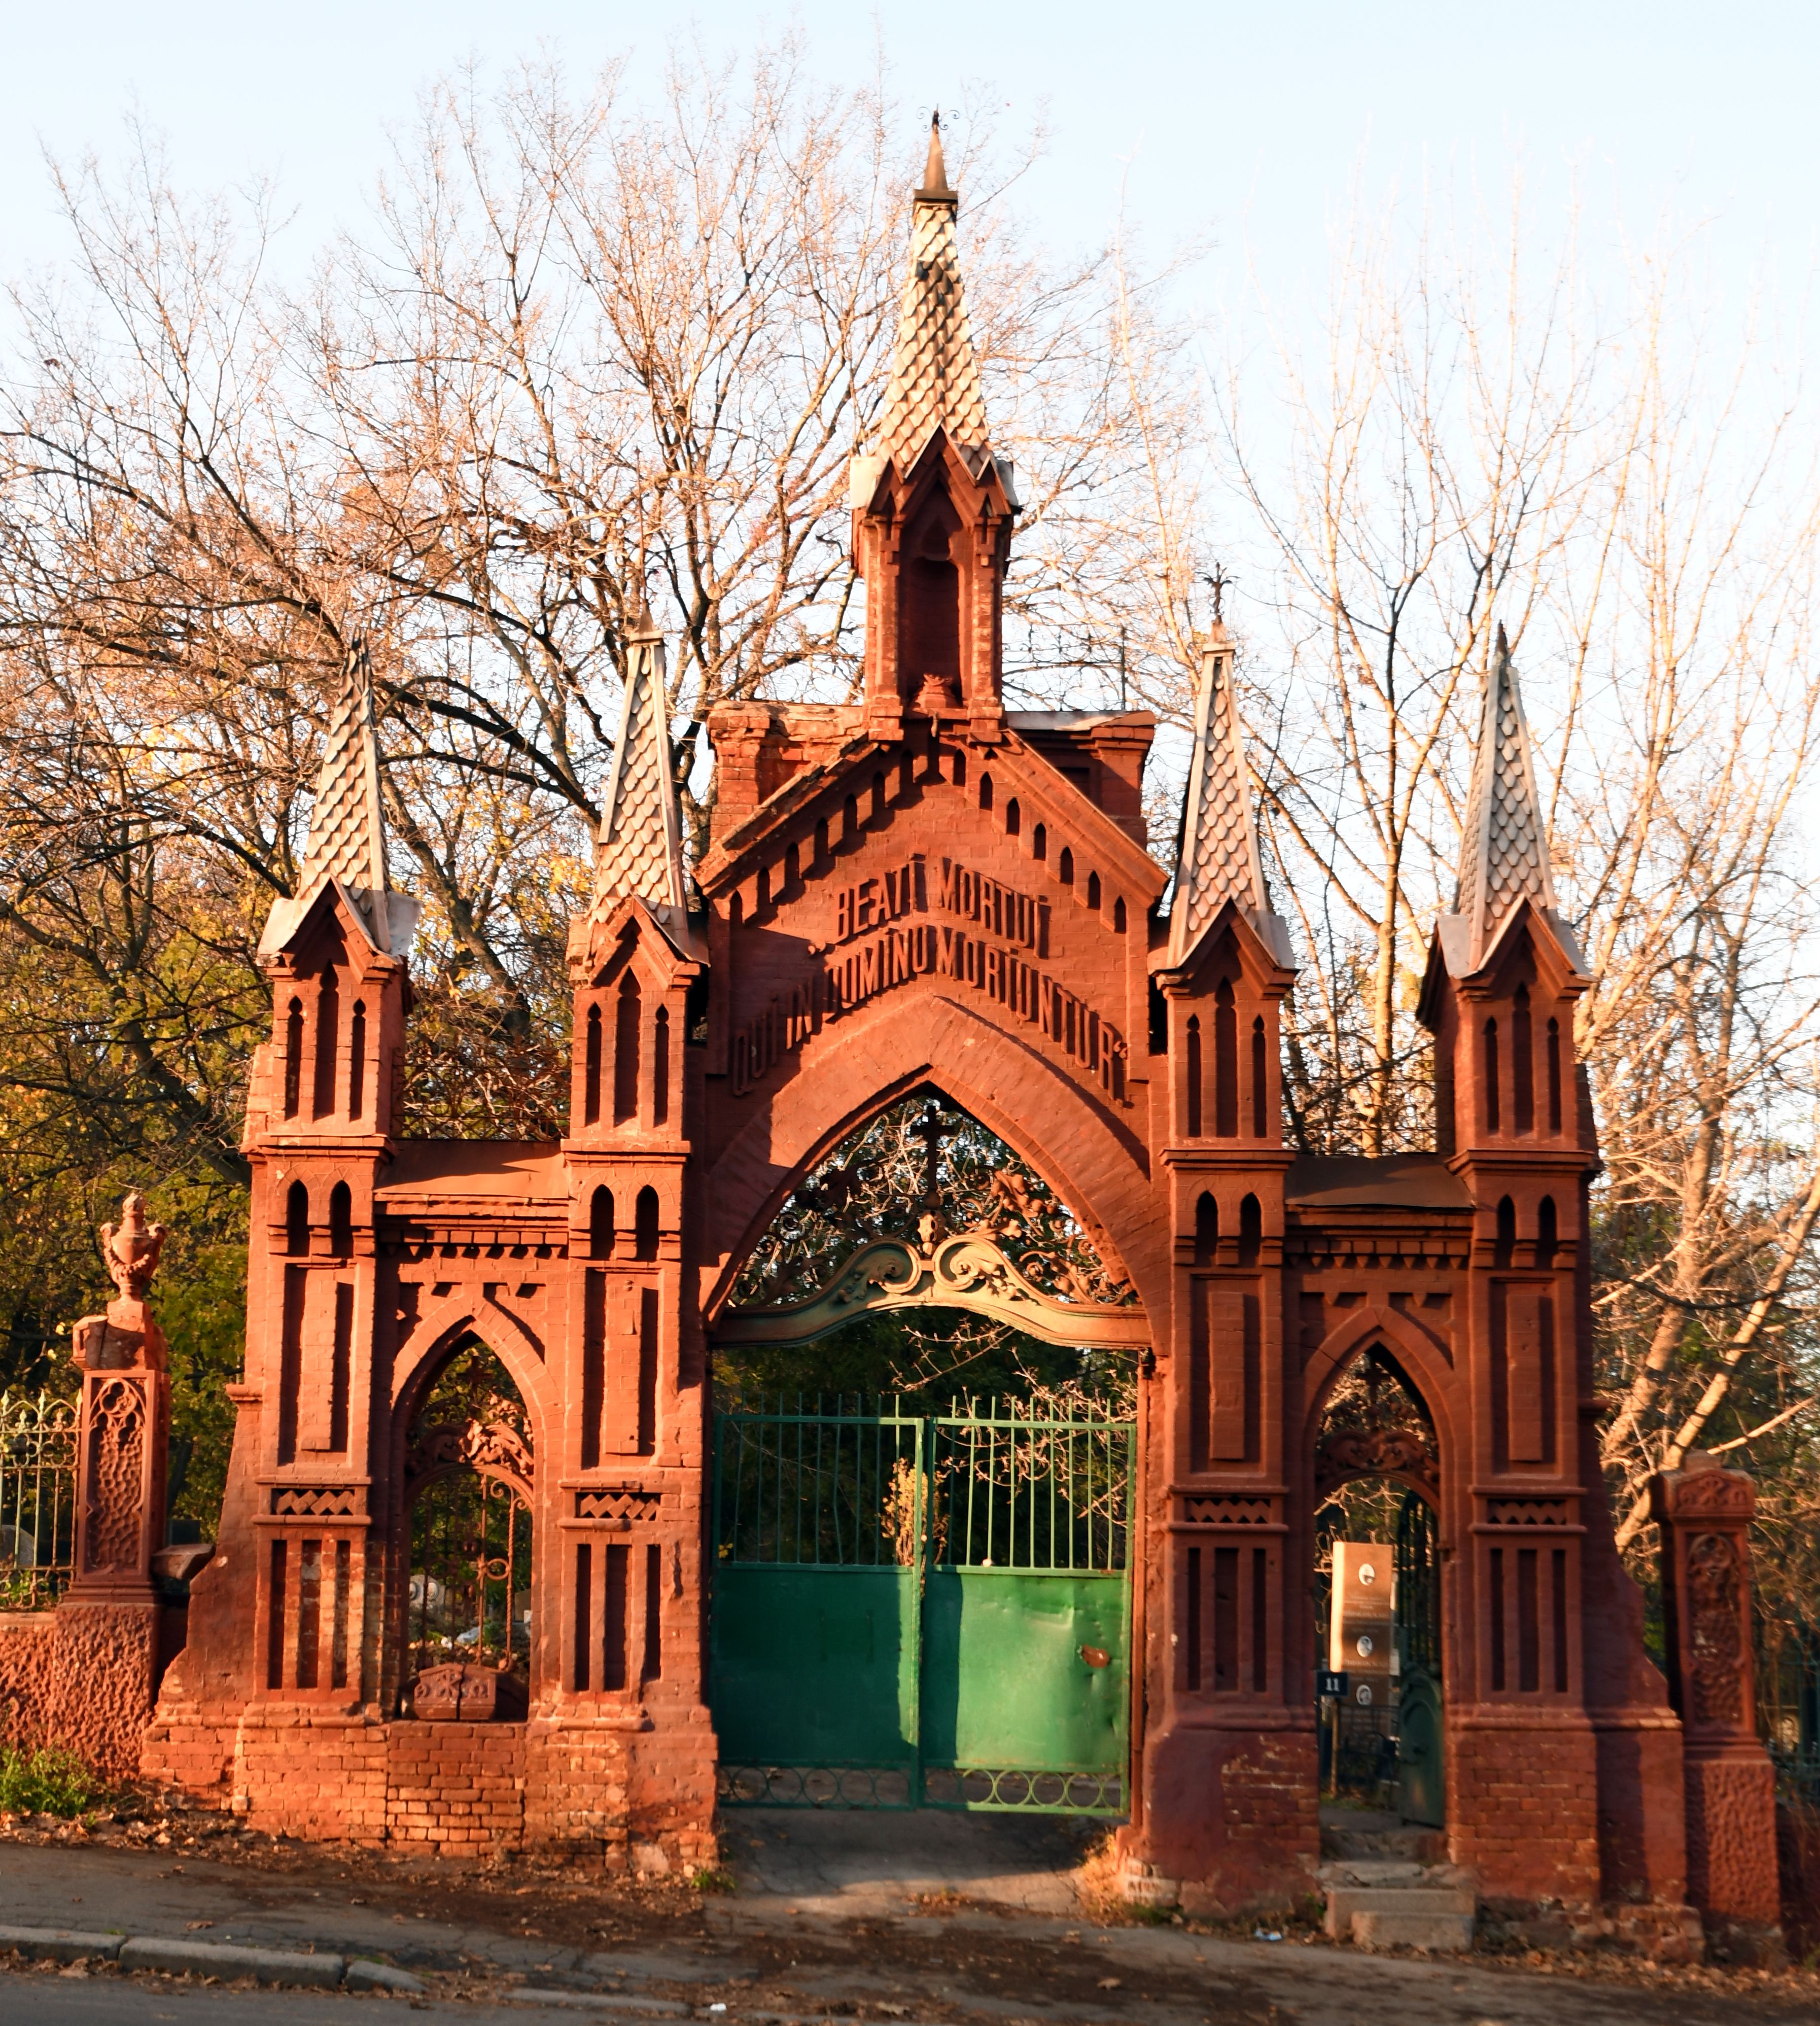 View from the front of the tall red brick cemetery gate